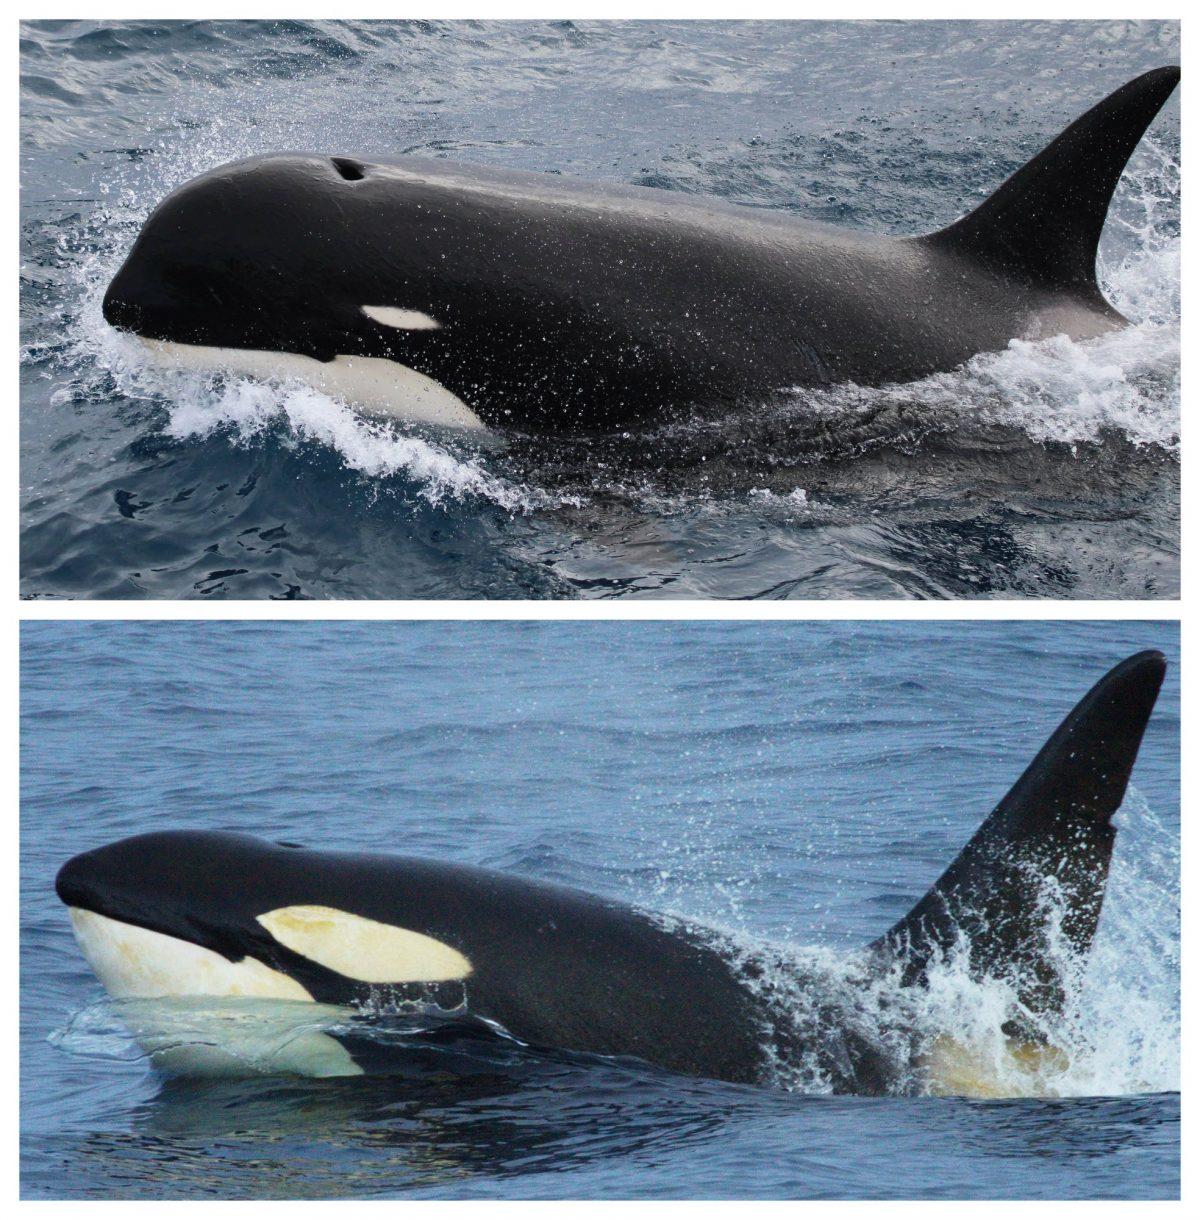 This combination of photos provided by Paul Tixier and NOAA shows a Type D killer whale, top, and a more common killer whale. (Paul Tixier/CEBC CNRS/MNHN Paris, Robert Pitman/NOAA via AP)